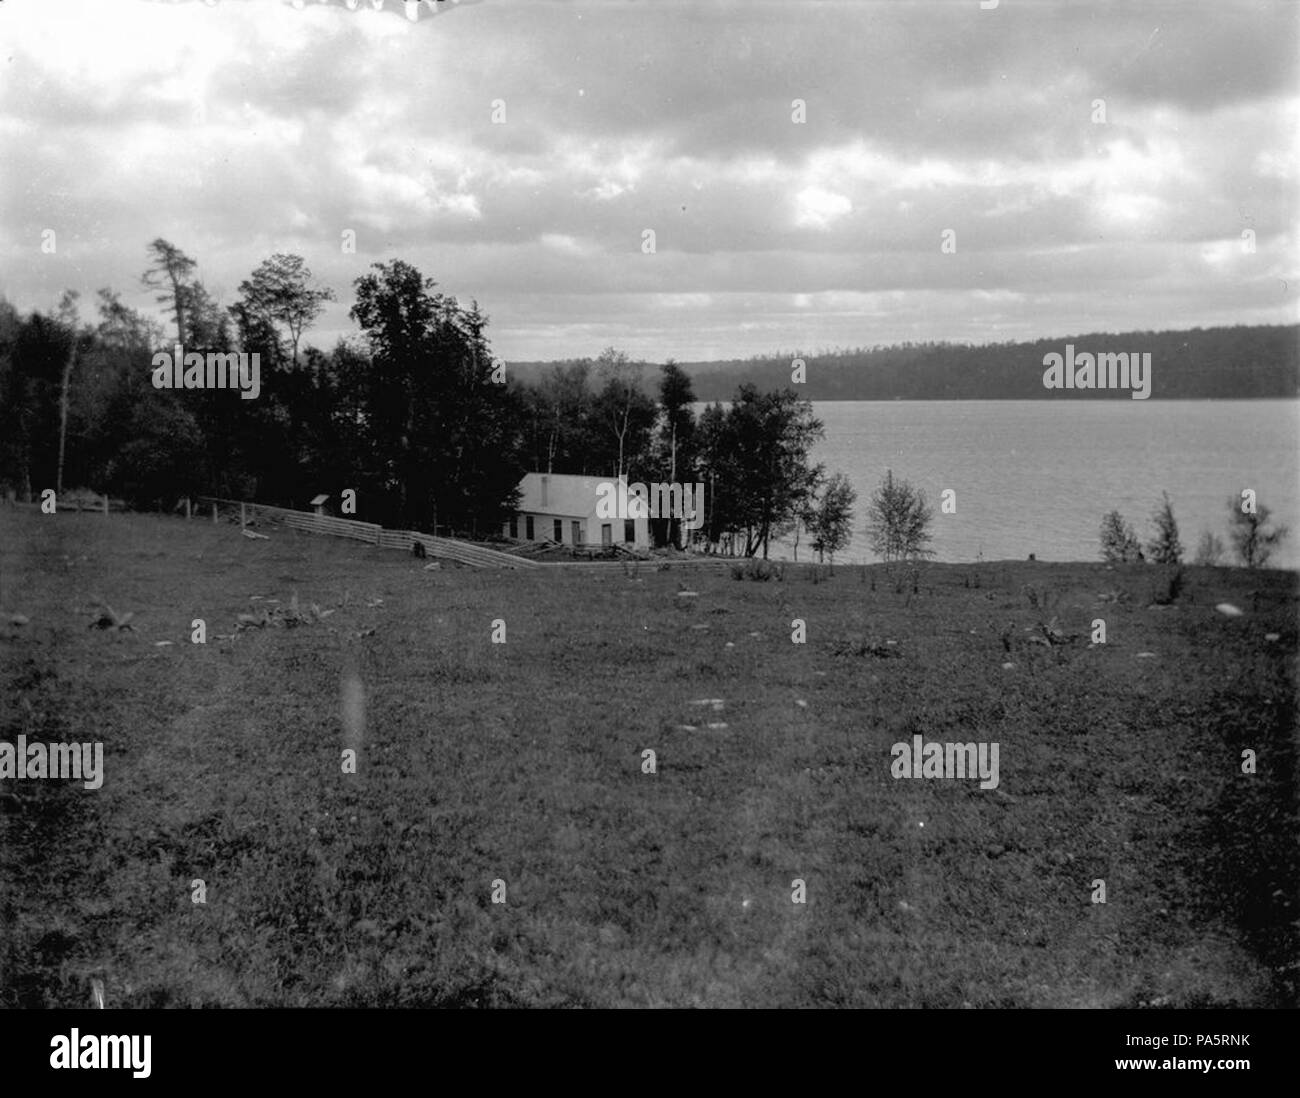 . English: EH597N n.d.Windmere cottage. Walloon Lake, Michigan. [Several white spots and curling around the top left appear on image due to warping of original negative.]Early Years, 1899-1921: Box 1 Folder 22Please credit: 'Photographer unknown. Papers of Ernest Hemingway. Photograph Collection. John F. Kennedy Presidential Library and Museum, Boston.'   This is an image of a place or building that is listed on the National Register of Historic Places in the United States of America. Its reference number is 68000026   . circa 1920 625 Ernest Hemingway Cottage EH3 Stock Photo